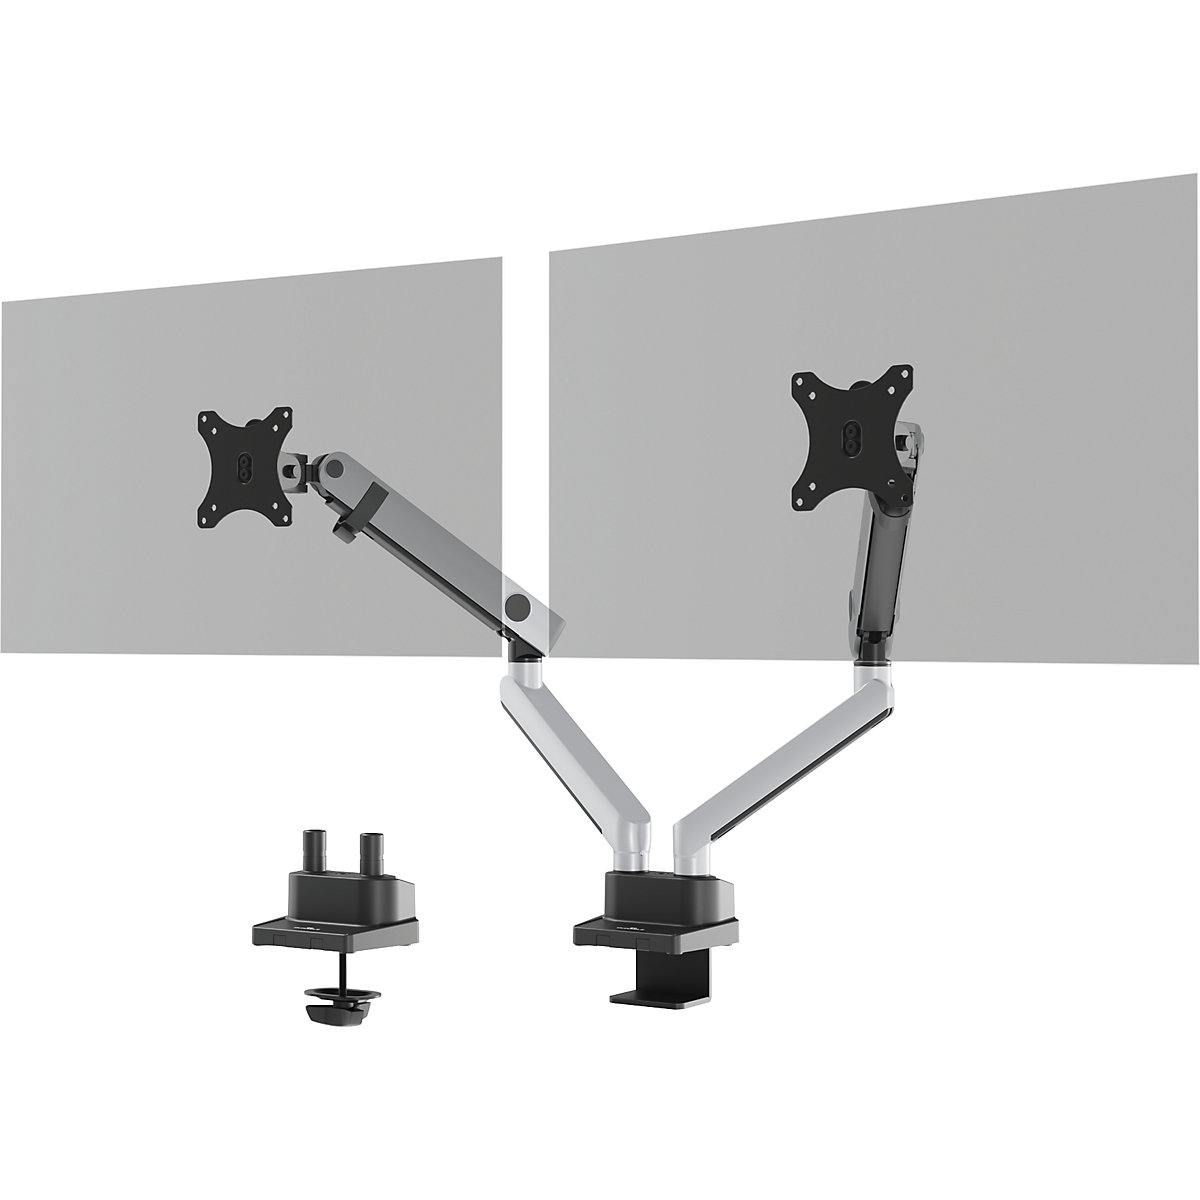 Uchwyt na monitor SELECT PLUS – DURABLE